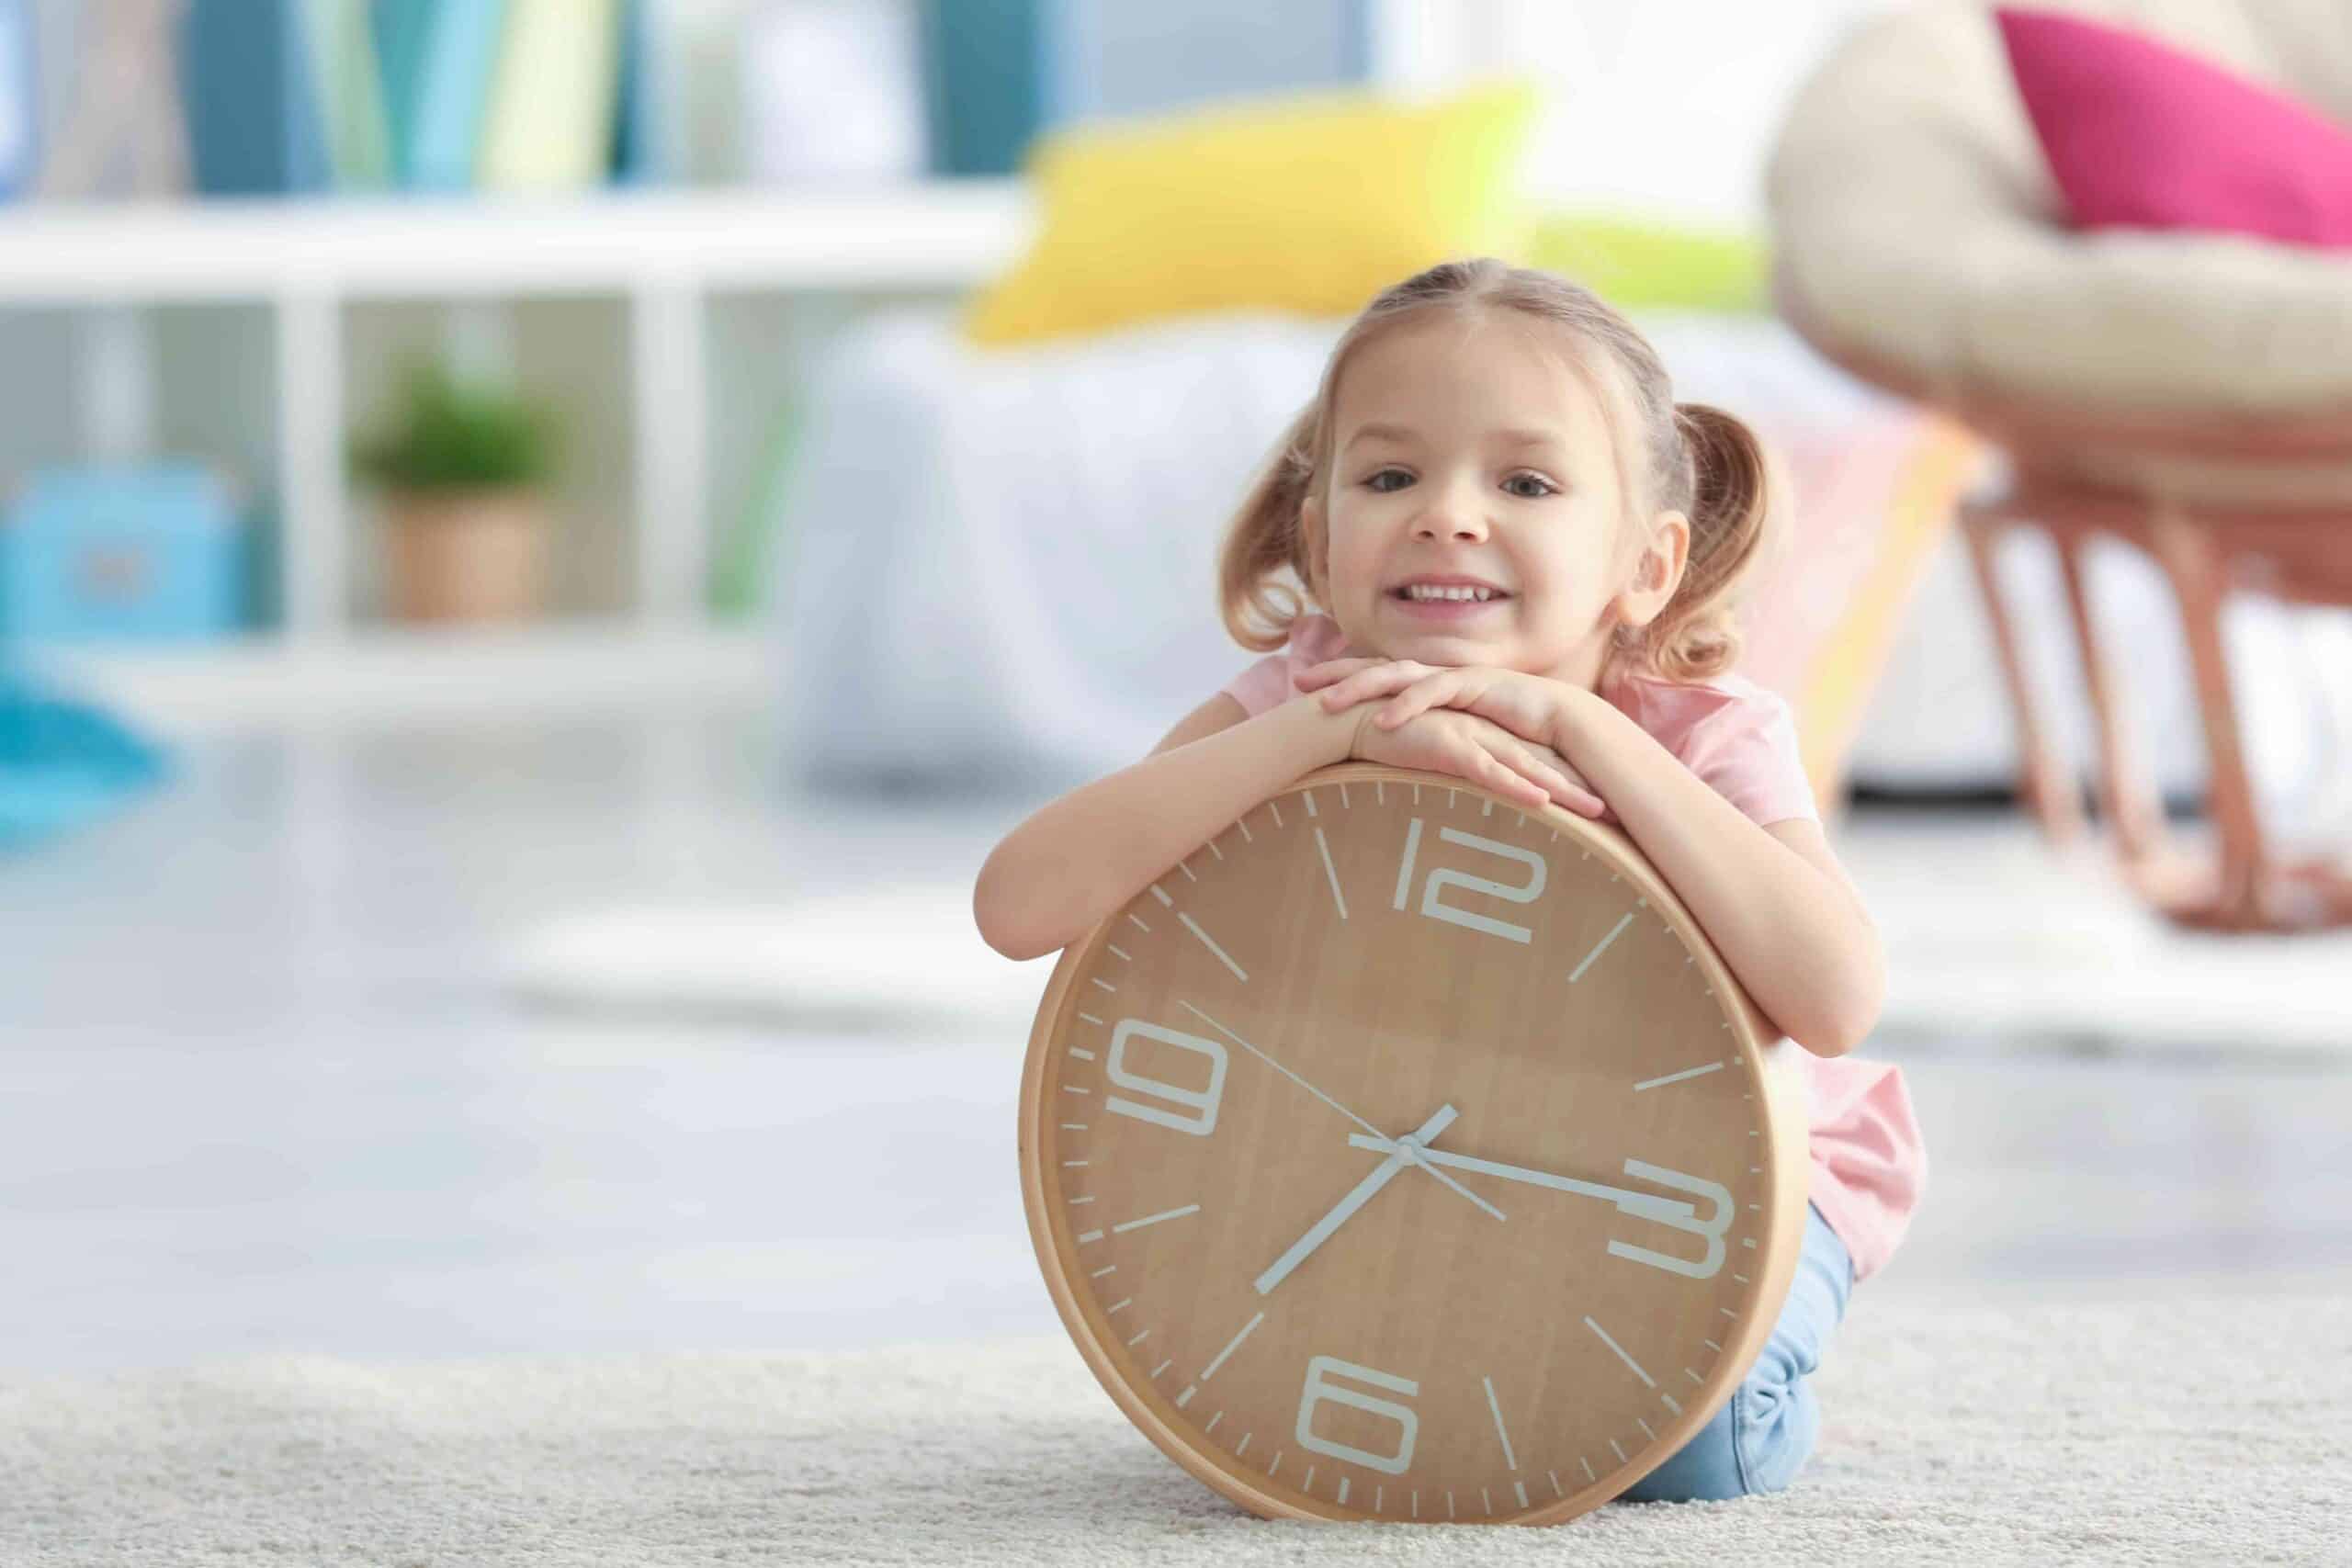 Smiling young girl holding a big clock, while sitting on floor at home. Representative of time with each parent and the topic of parenting plans and parenting agreements for separated parents.